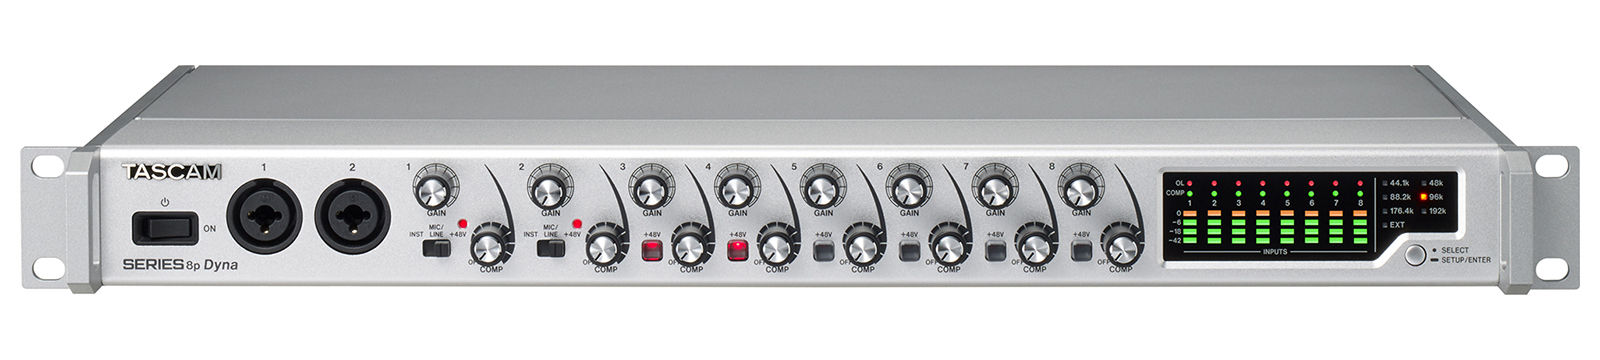 SERIES 8p Dyna | 8-CHANNEL MIC PREAMP & DA CONVERTER WITH